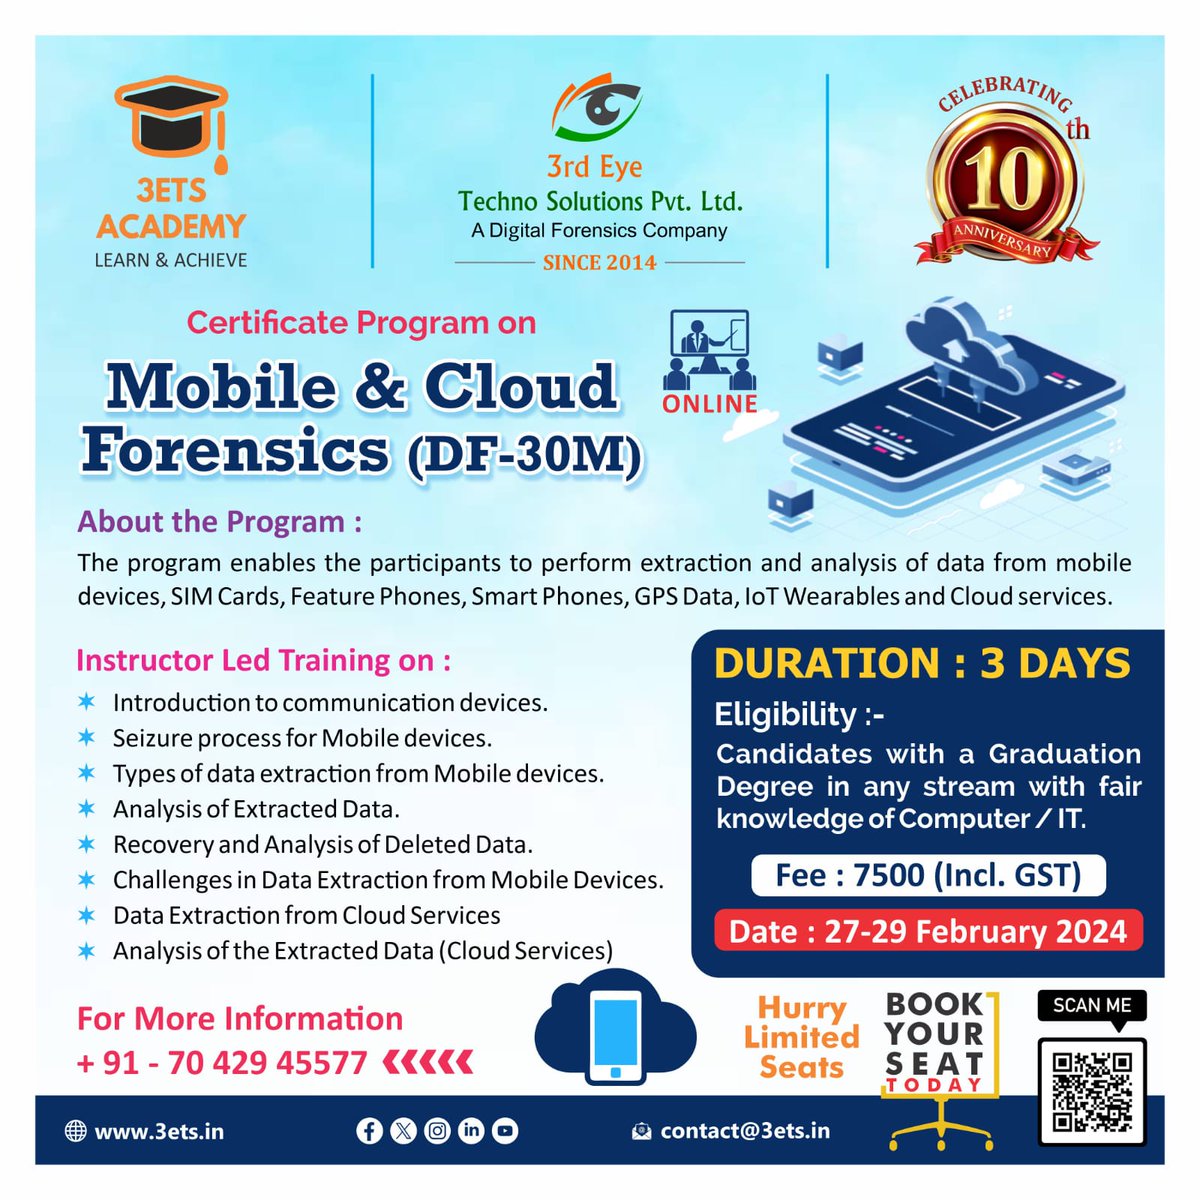 🌟 3ETS Academy is thrilled to unveil a 3-days online certification program on Mobile and Cloud Forensics.
📅 February 27th to 29th, 2024
💻 Online | 3 Days
🔗 forms.gle/hocJwXzPvrVEgV…
Secure your spot - Register Now!
🚀#DFIR #MobileForensics #CloudForensics #CertificationProgram